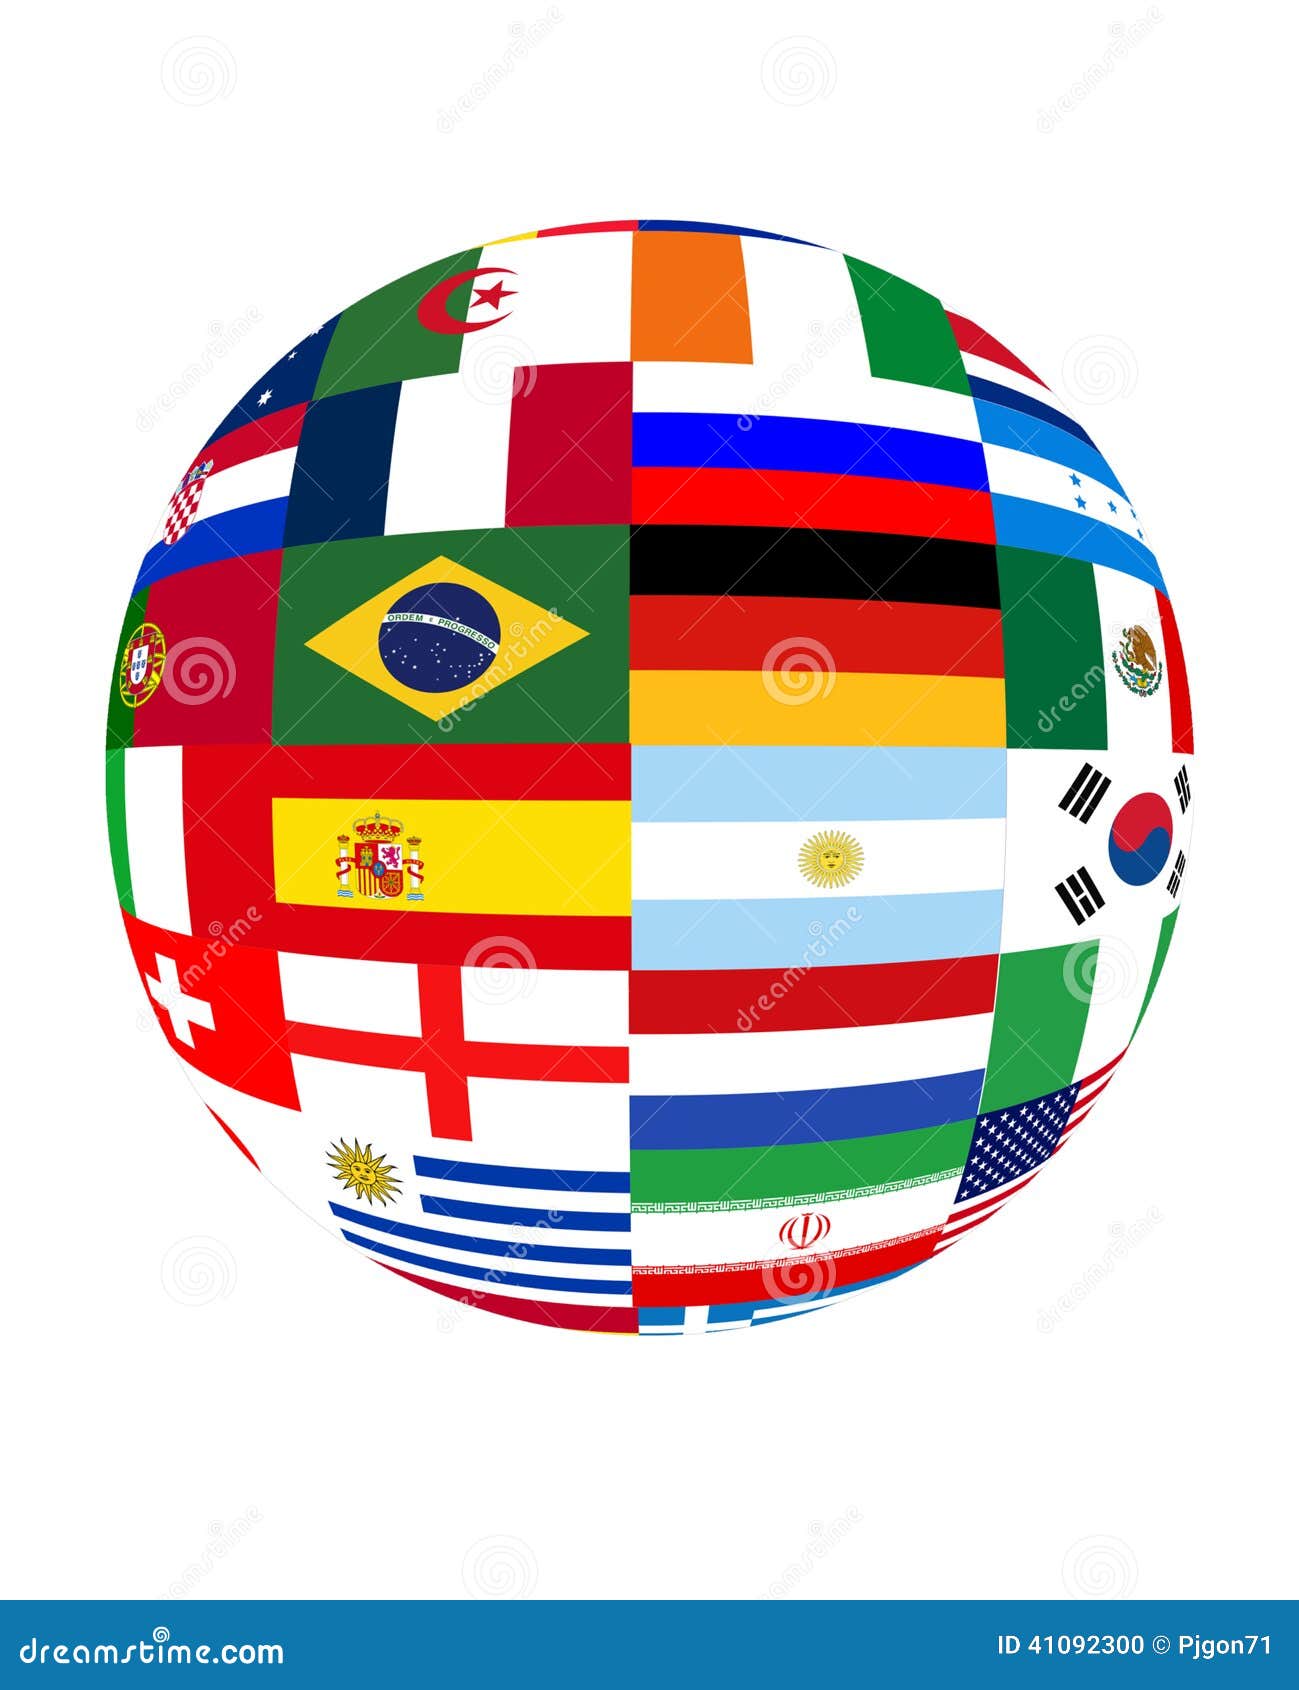 world cup 2014 clipart - photo #43